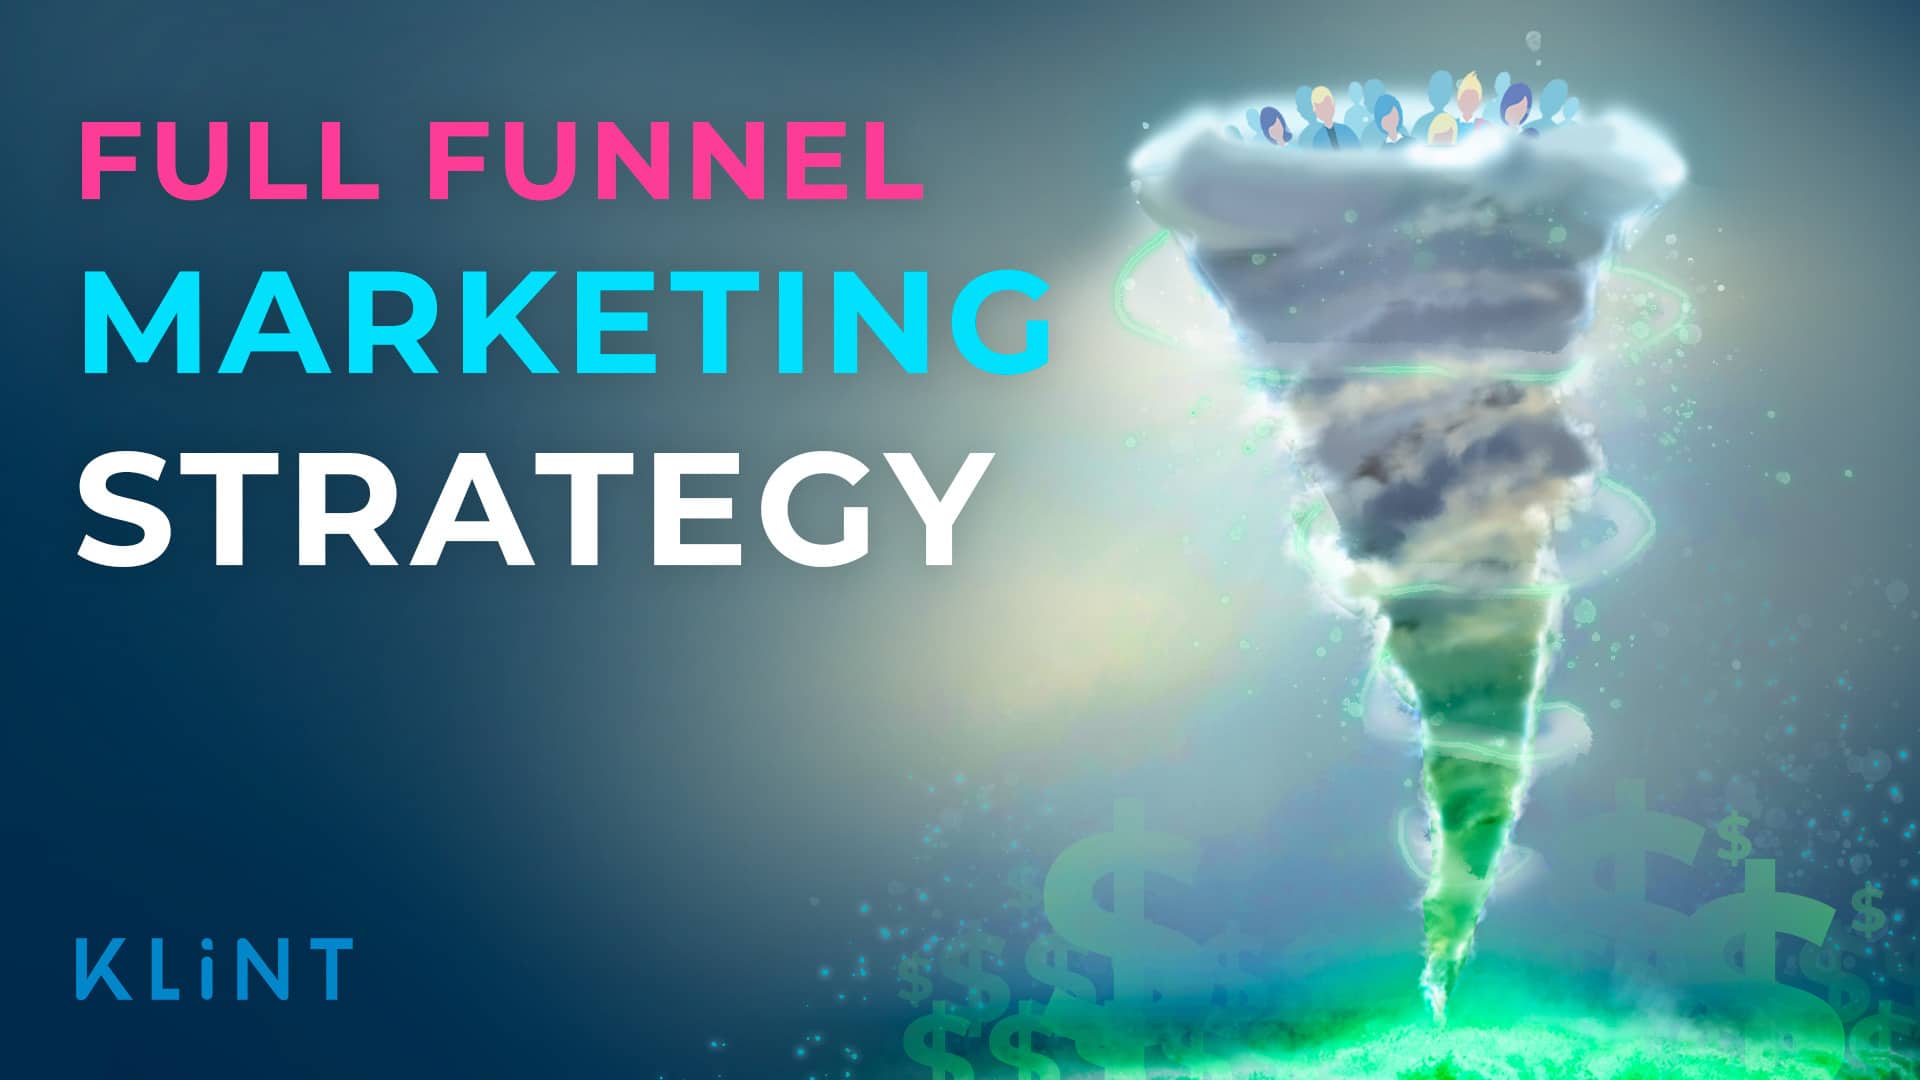 tornado with money coming out of it. text overlaid: "full funnel marketing strategy"